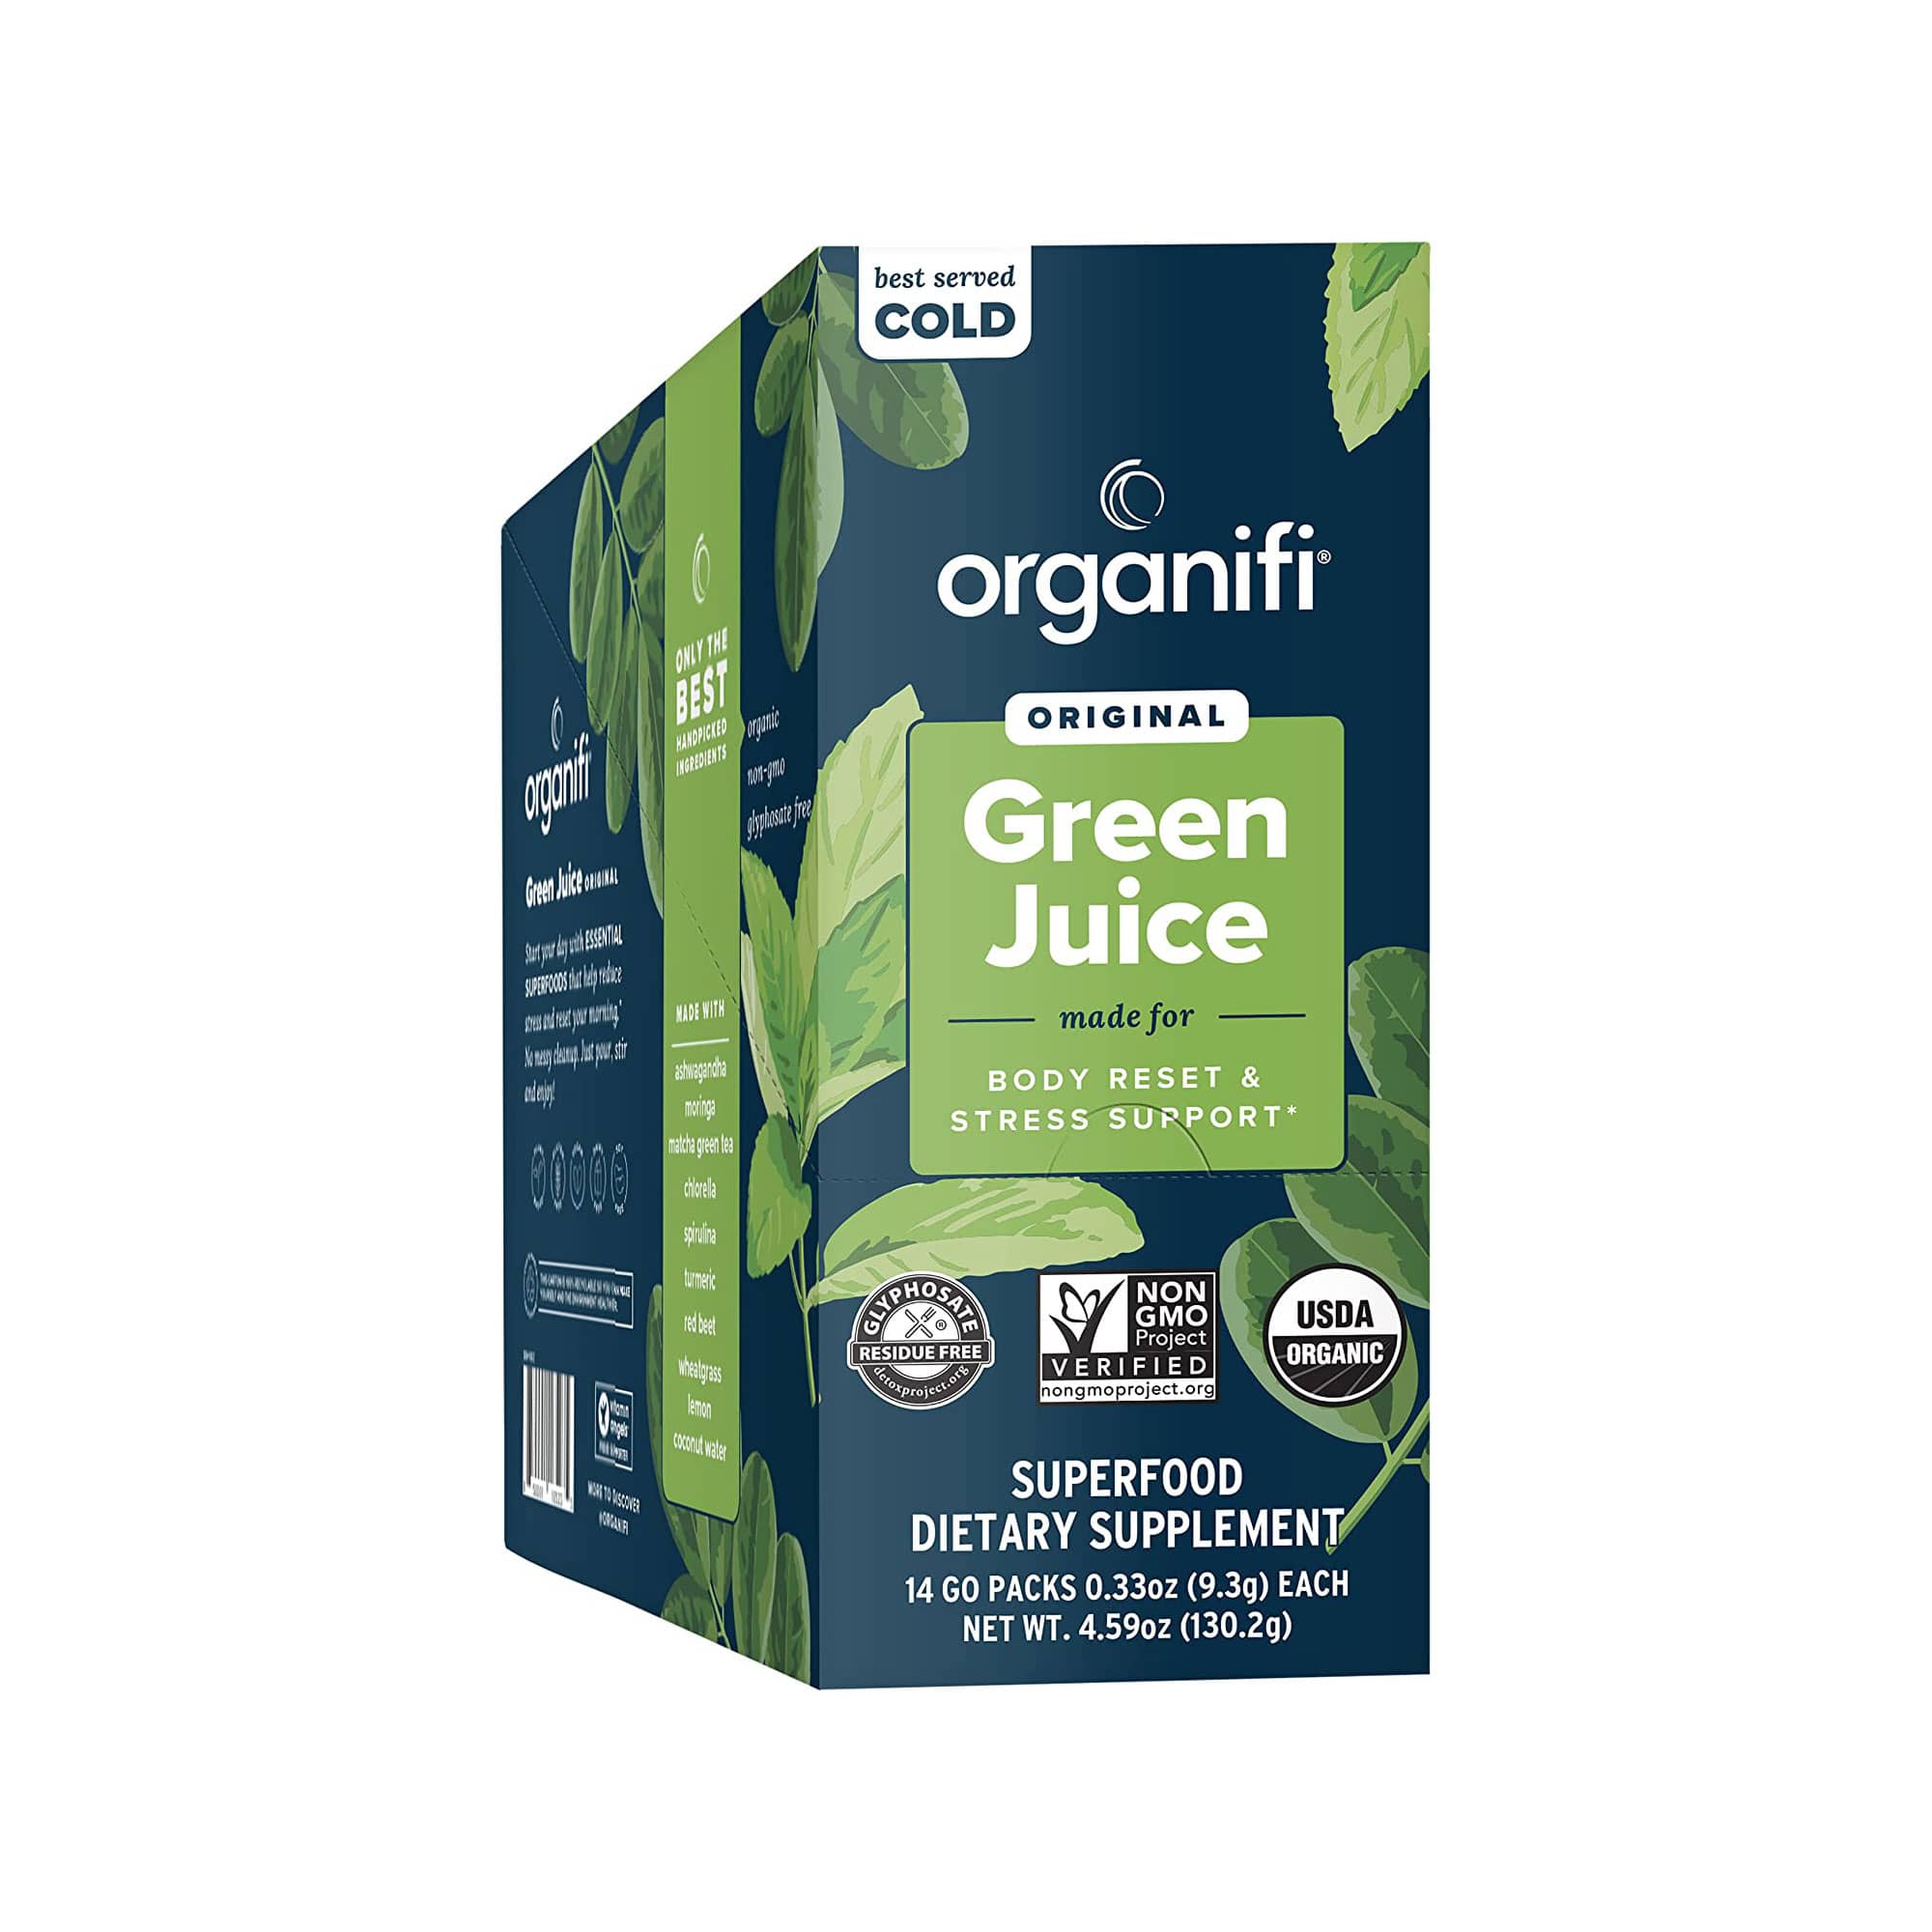 2022 Unbiased Organifi Green Juice Review + Coupon - An Overview